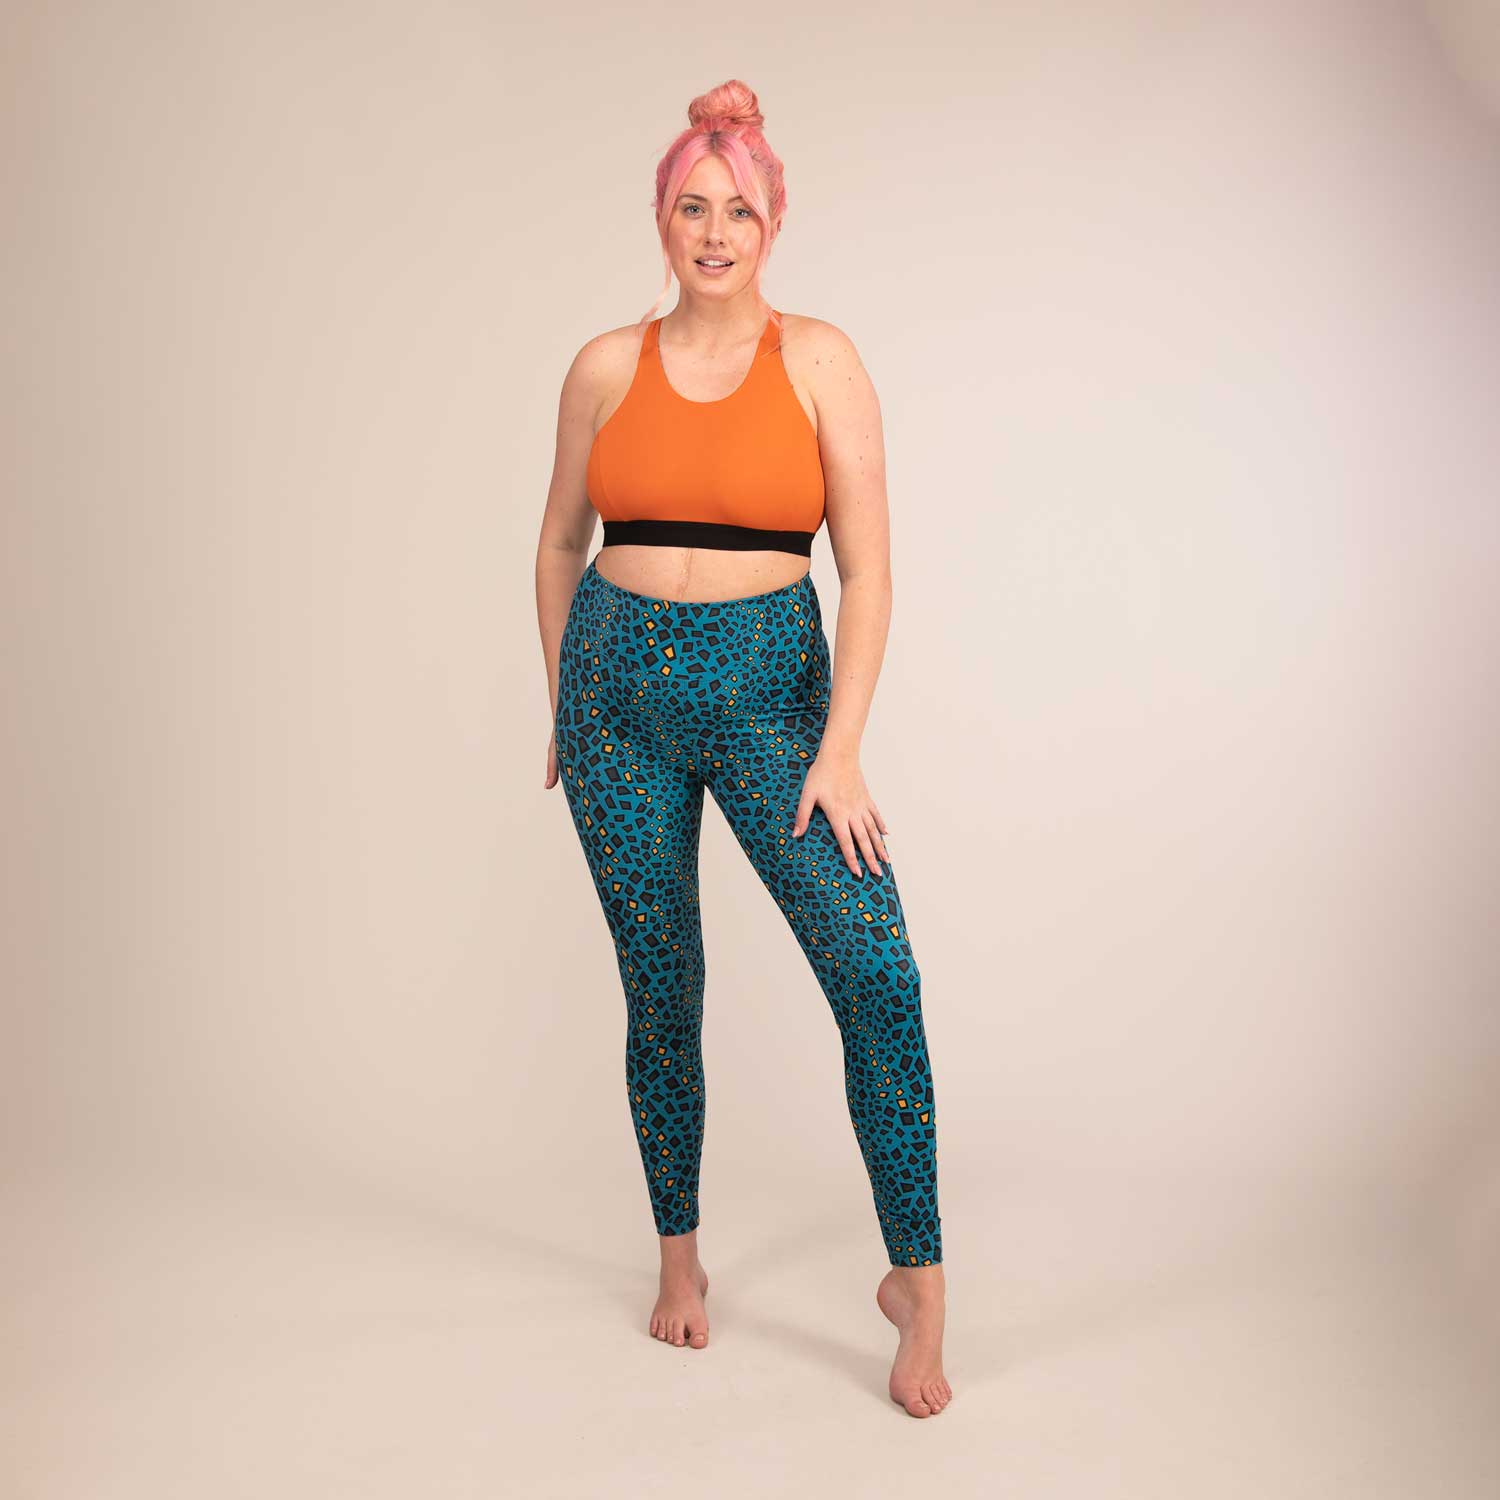 TITAN MINIMAL REPTILE | Printed Recycled Leggings | 3RD ROCK Clothing -  Sophie is 5ft 9 with a 34" waist, 42" hips and wears a size 16 F